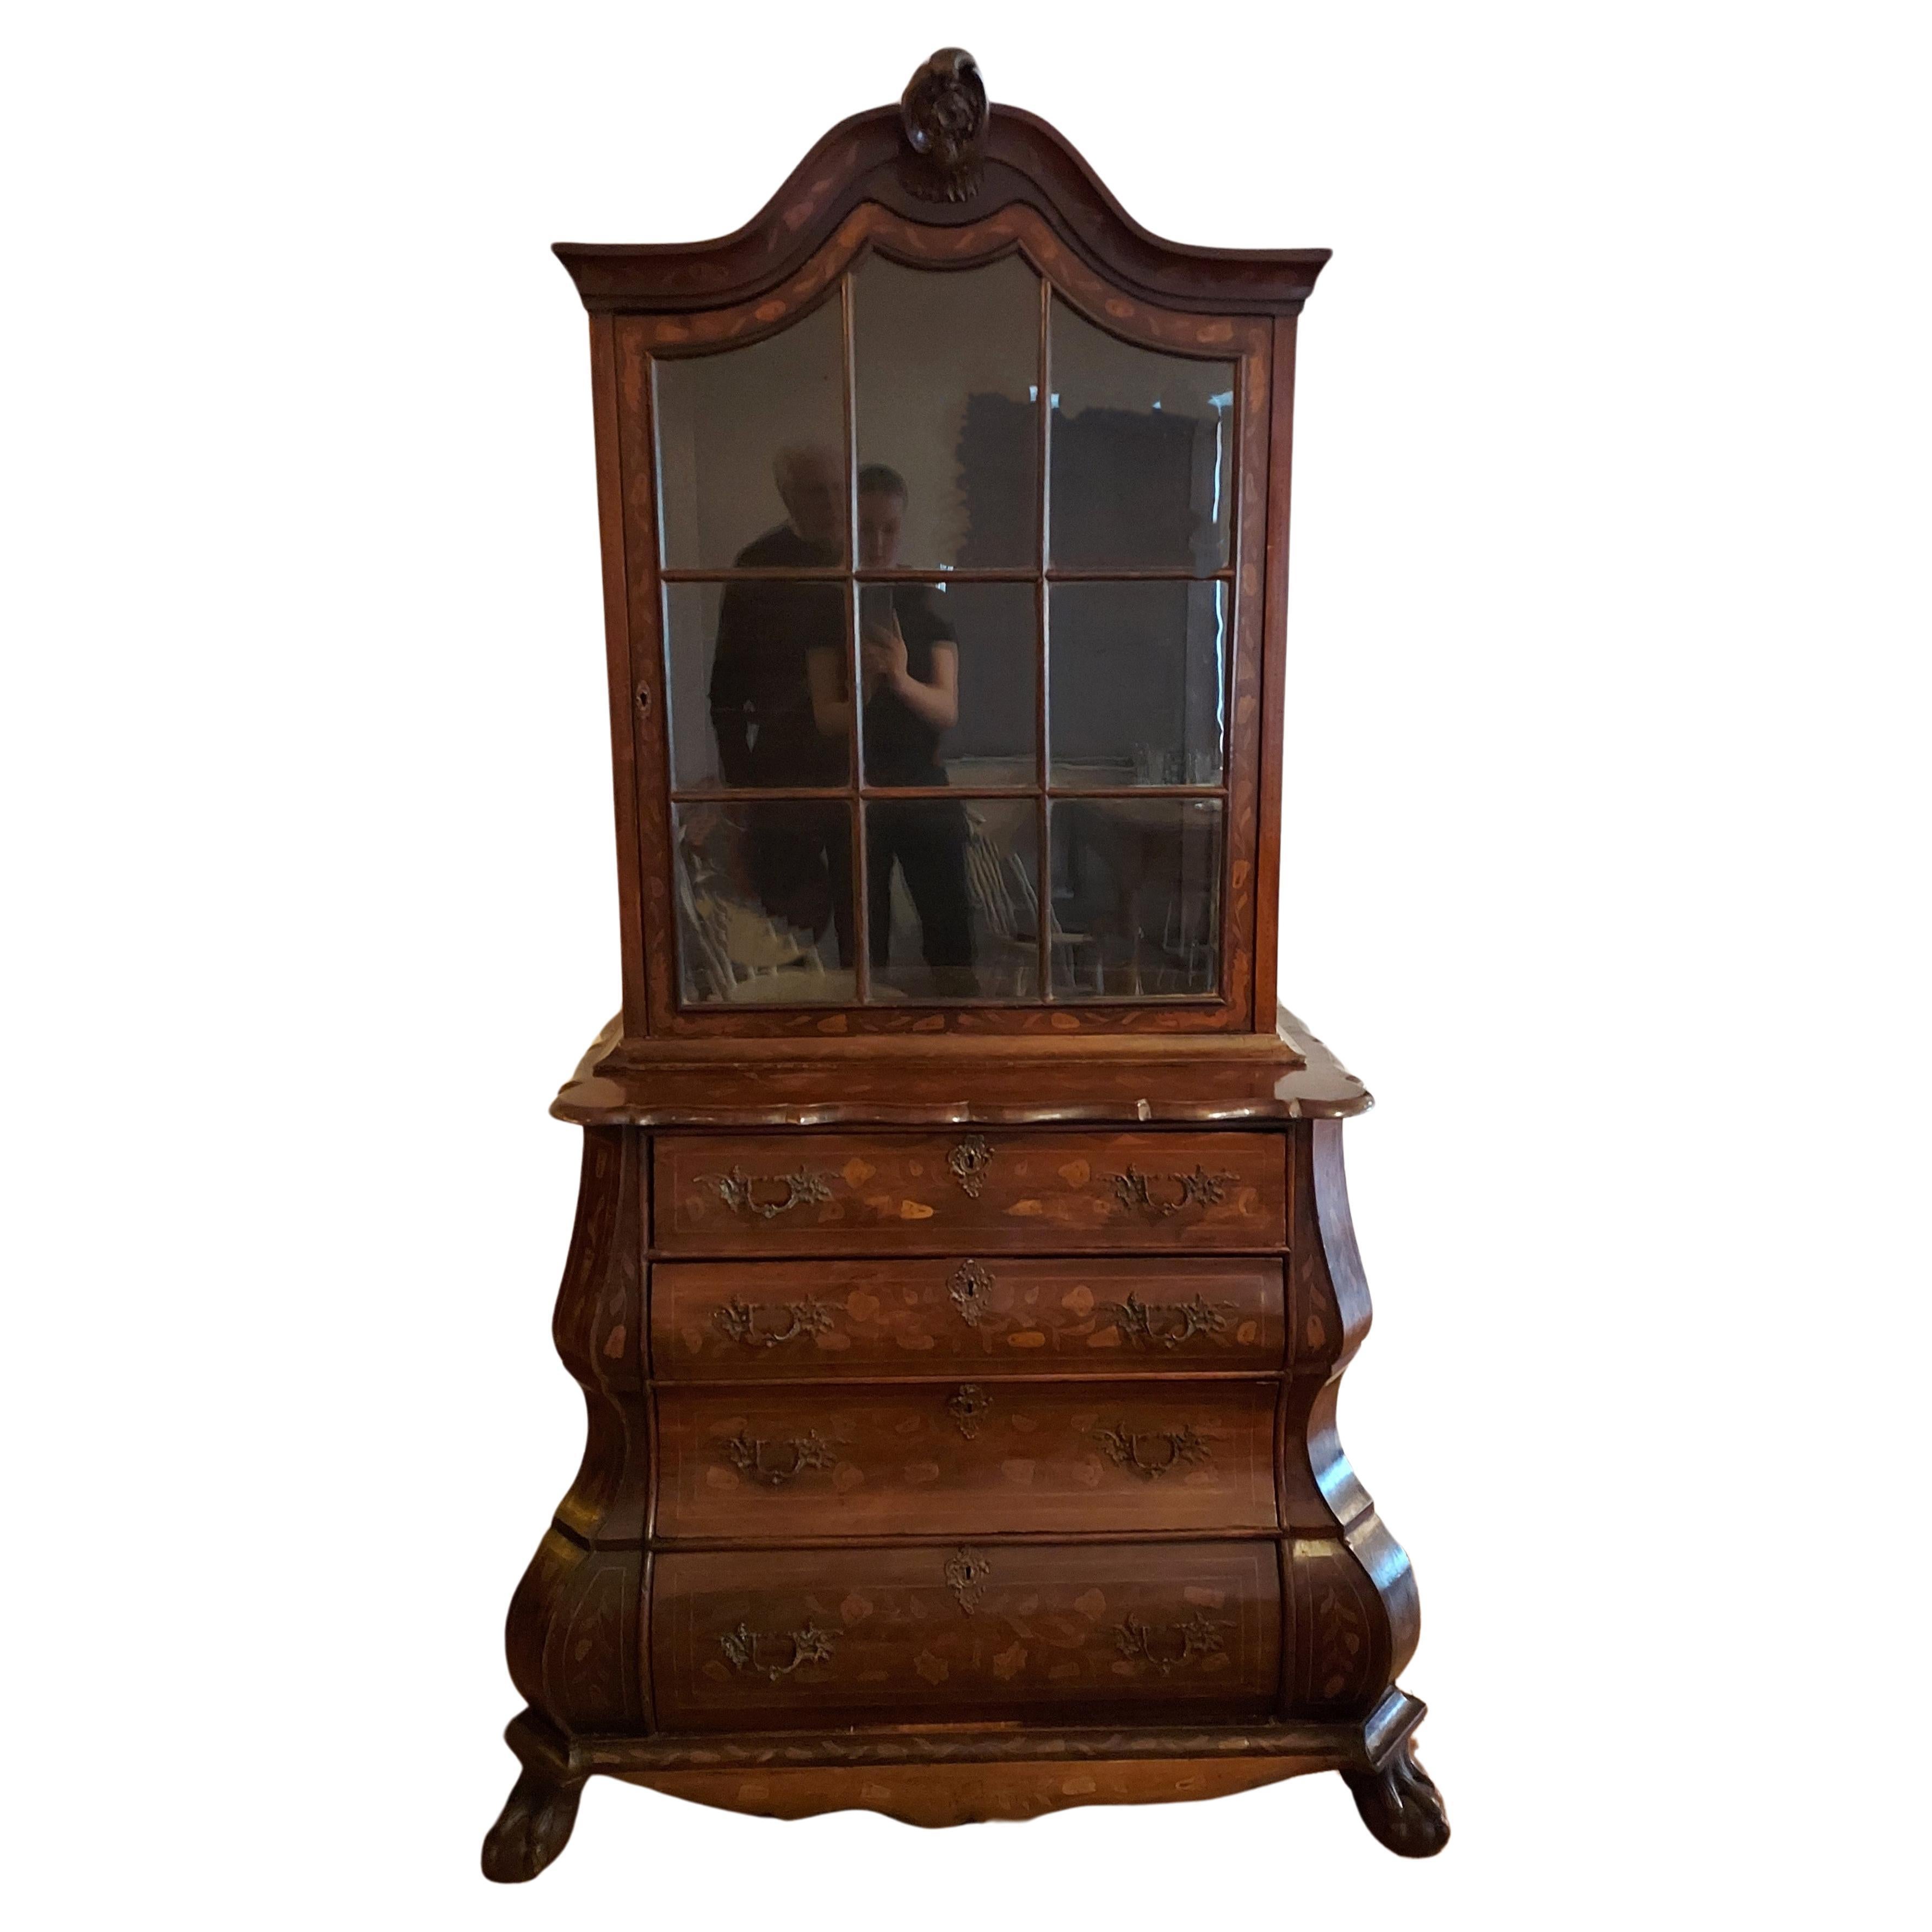 Beautifully proportioned small marquetry Dutch Display Cabinet with Chest